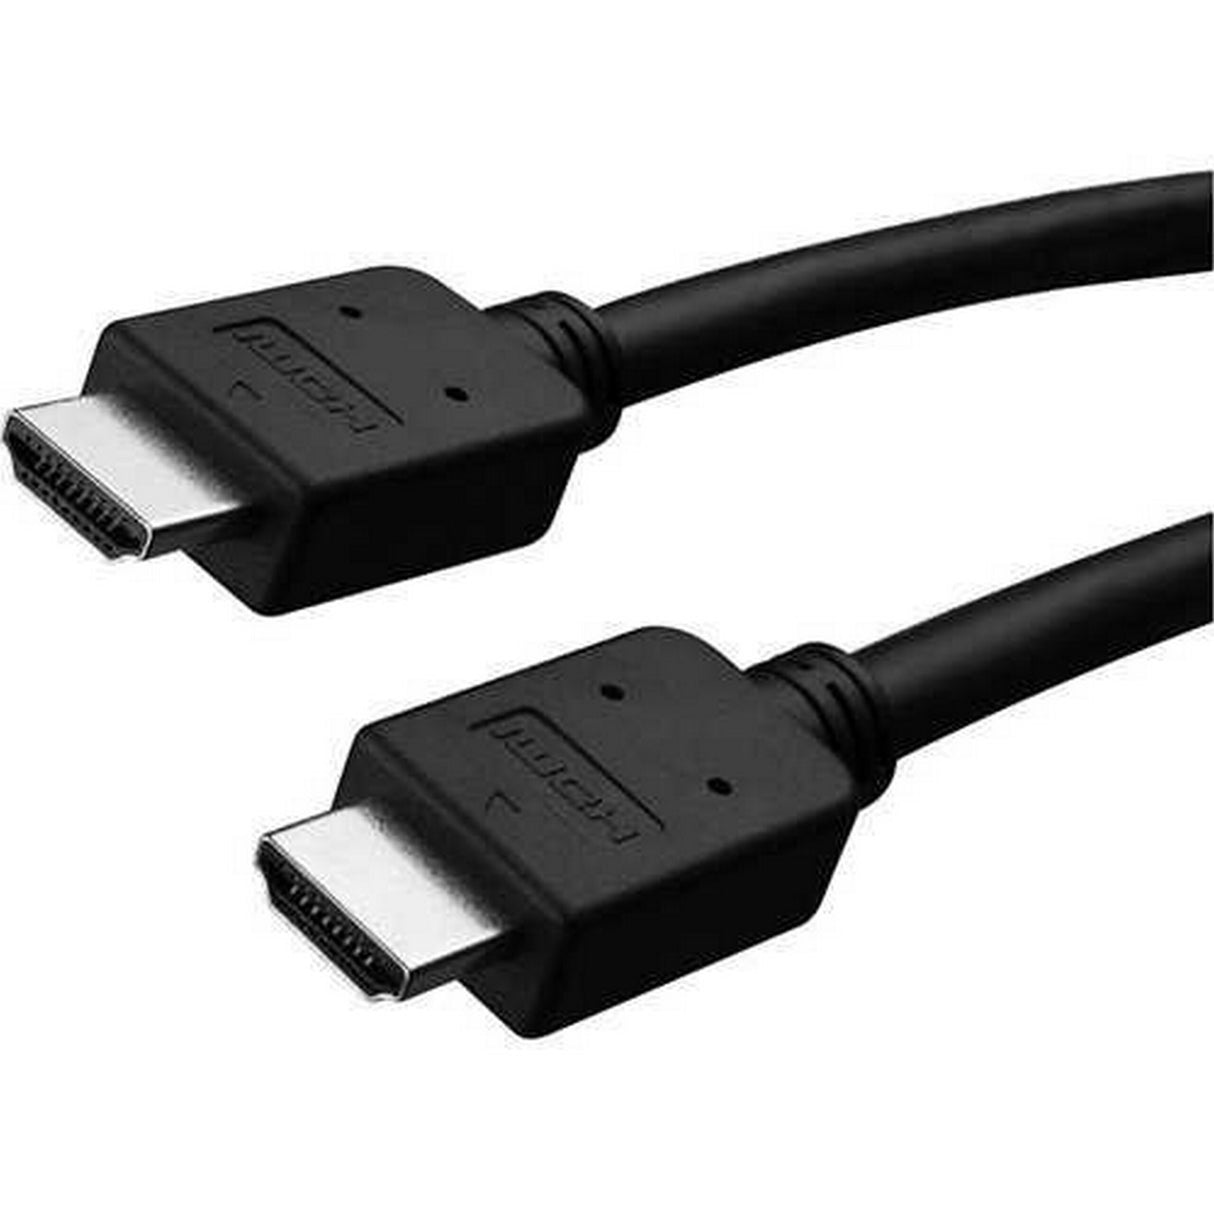 W Box HDMI10 10-Foot 1080P HDMI Cable with Ethernet